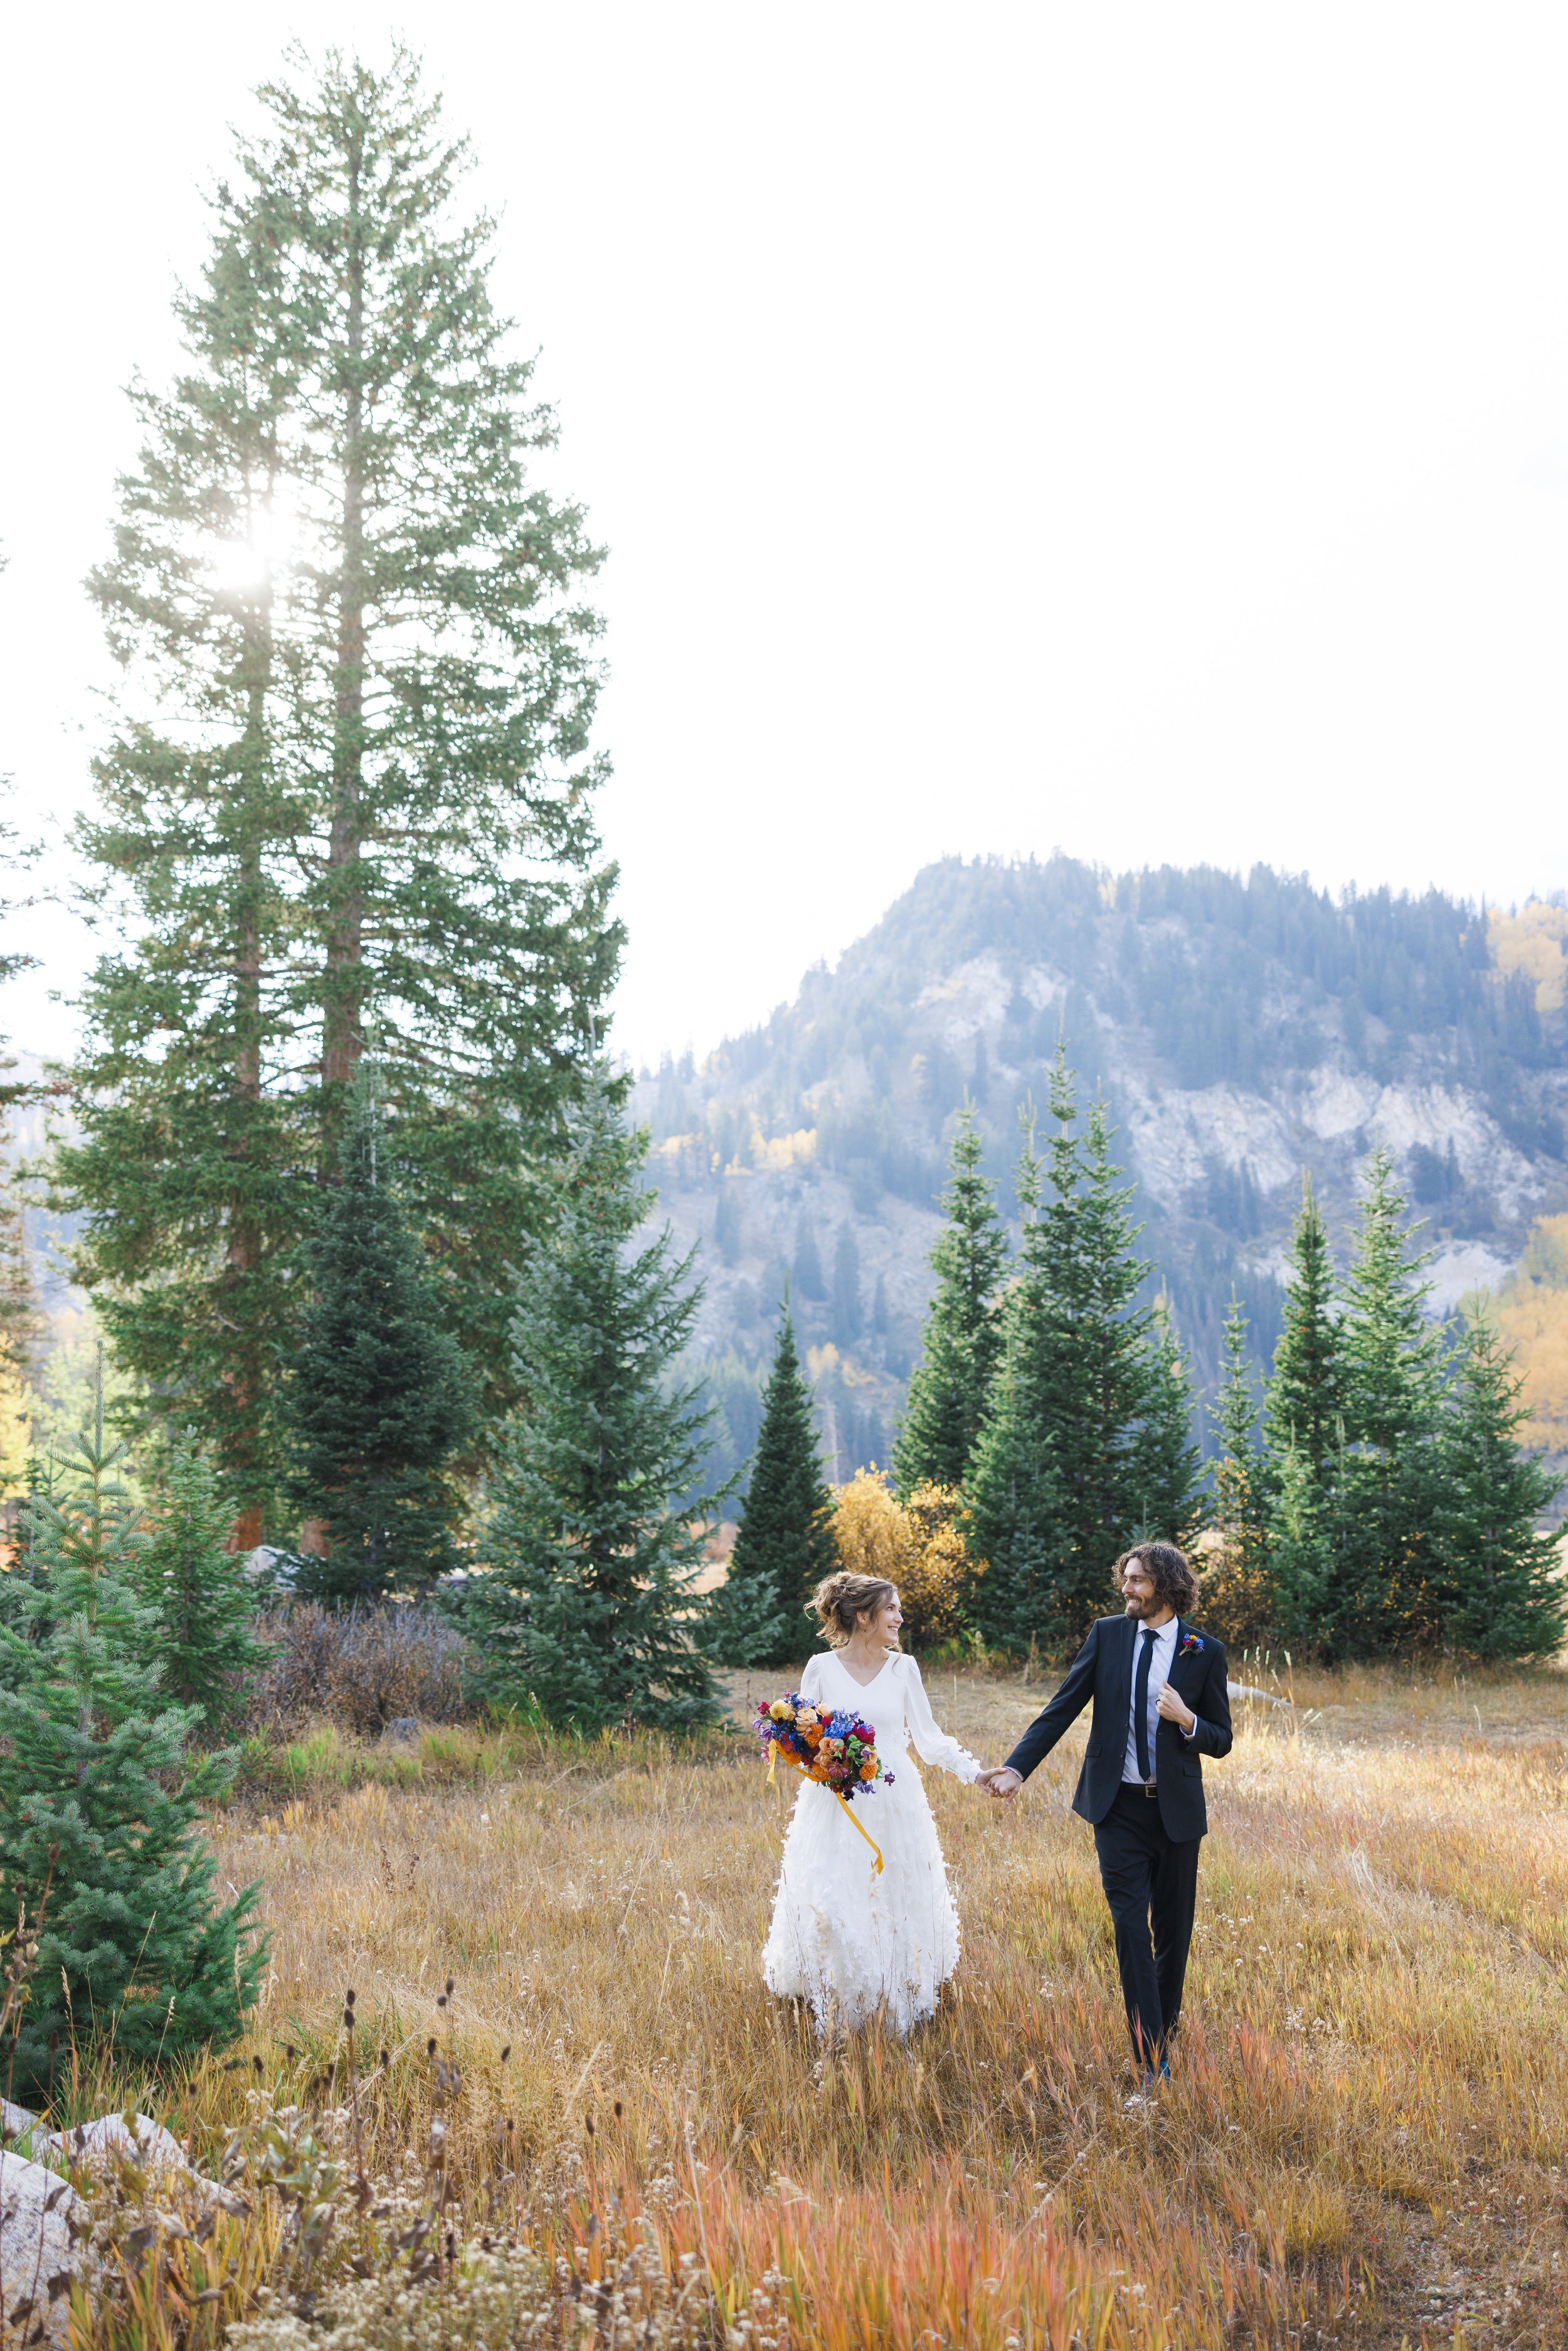  At Silver Lake, a bride and groom hold hands at dusk during a formal session with Savanna Richardson Photography. wedding formals #SavannaRichardsonPhotography #SavannaRichardsonFormals #CottonwoodCanyon #WeddingFormals #SLCWedding #fallwed 